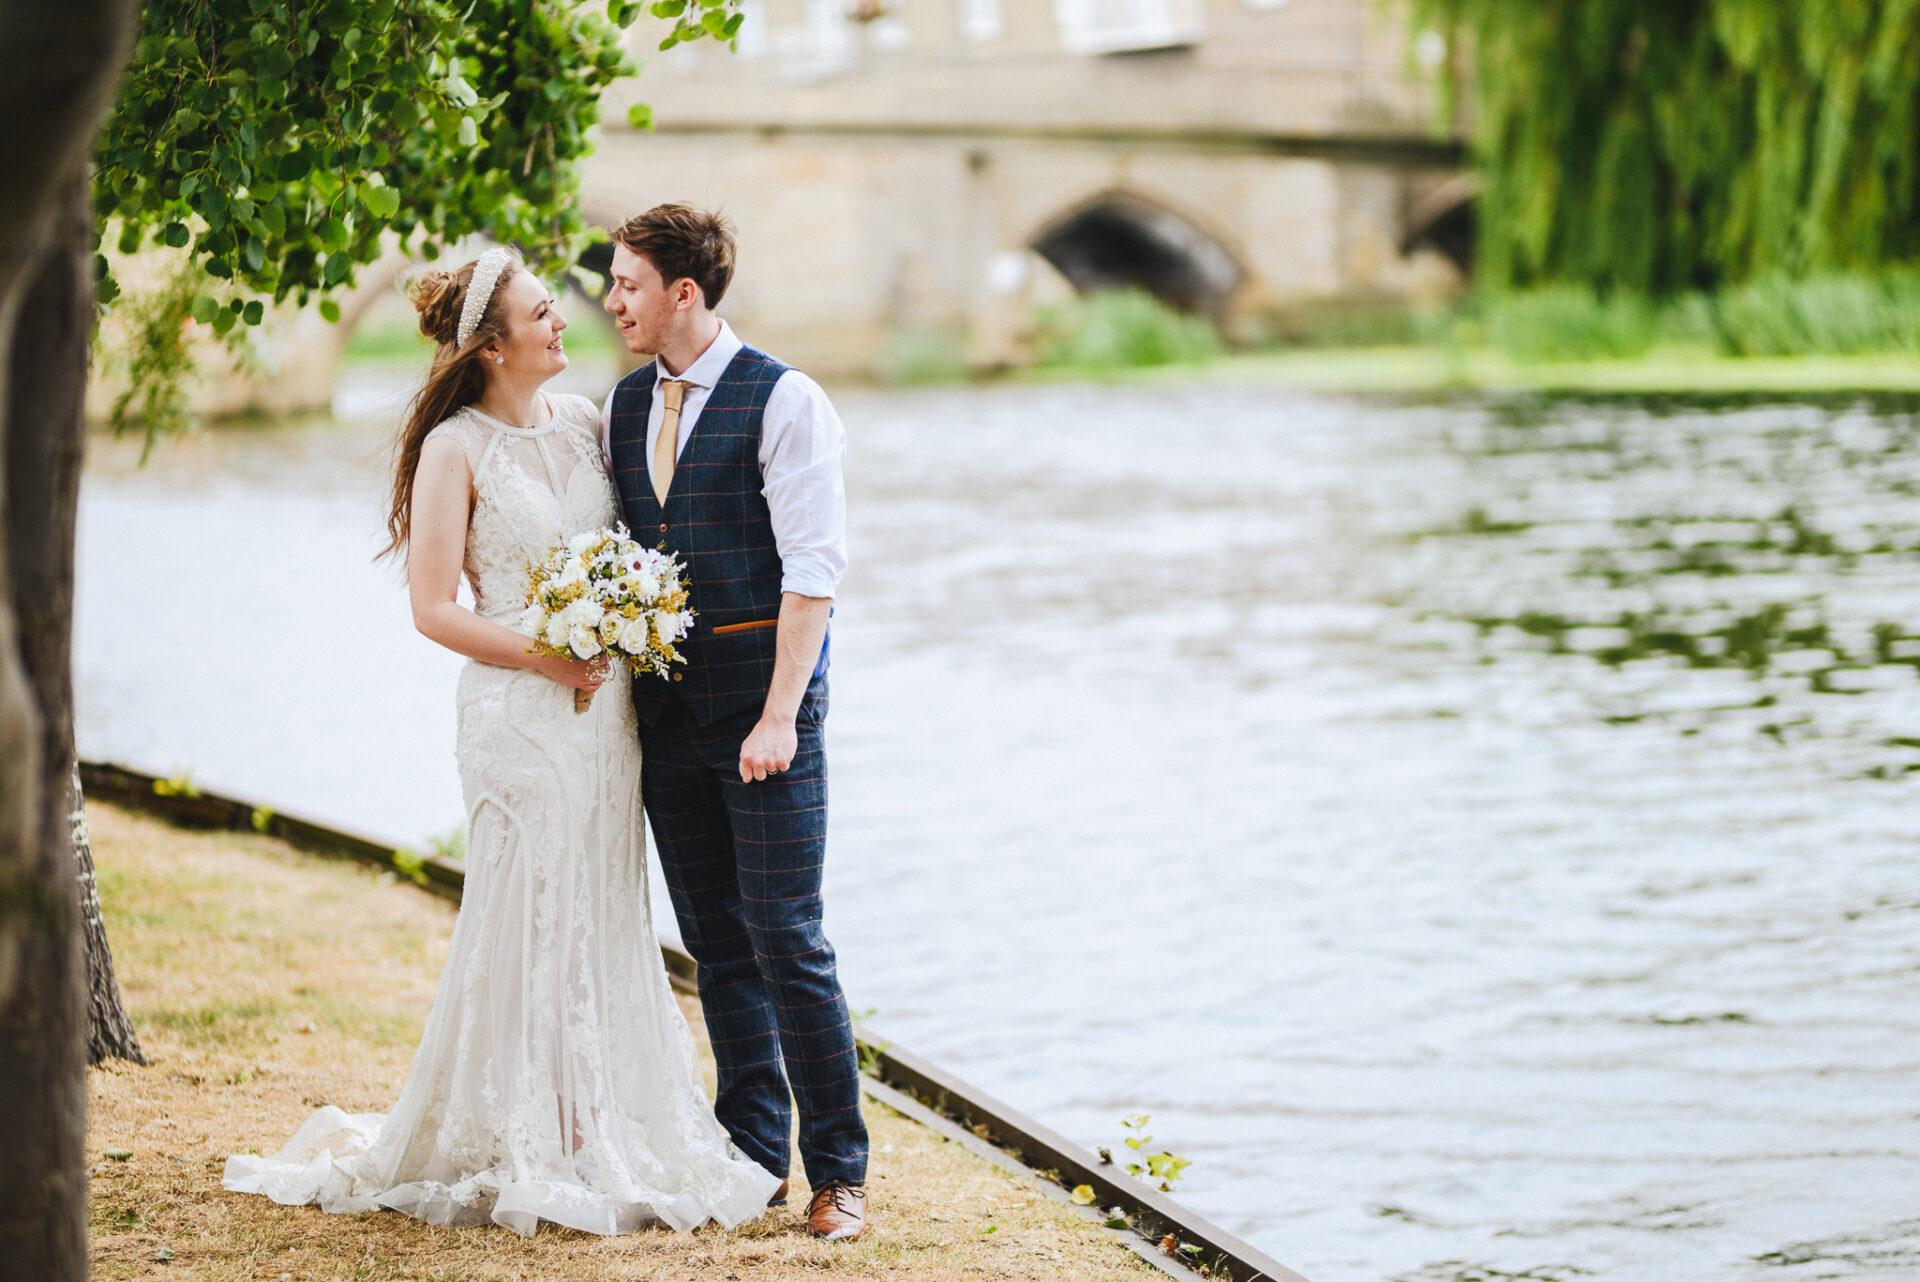 Wedding photo shoot by the river Great Ouse in Peterborough.